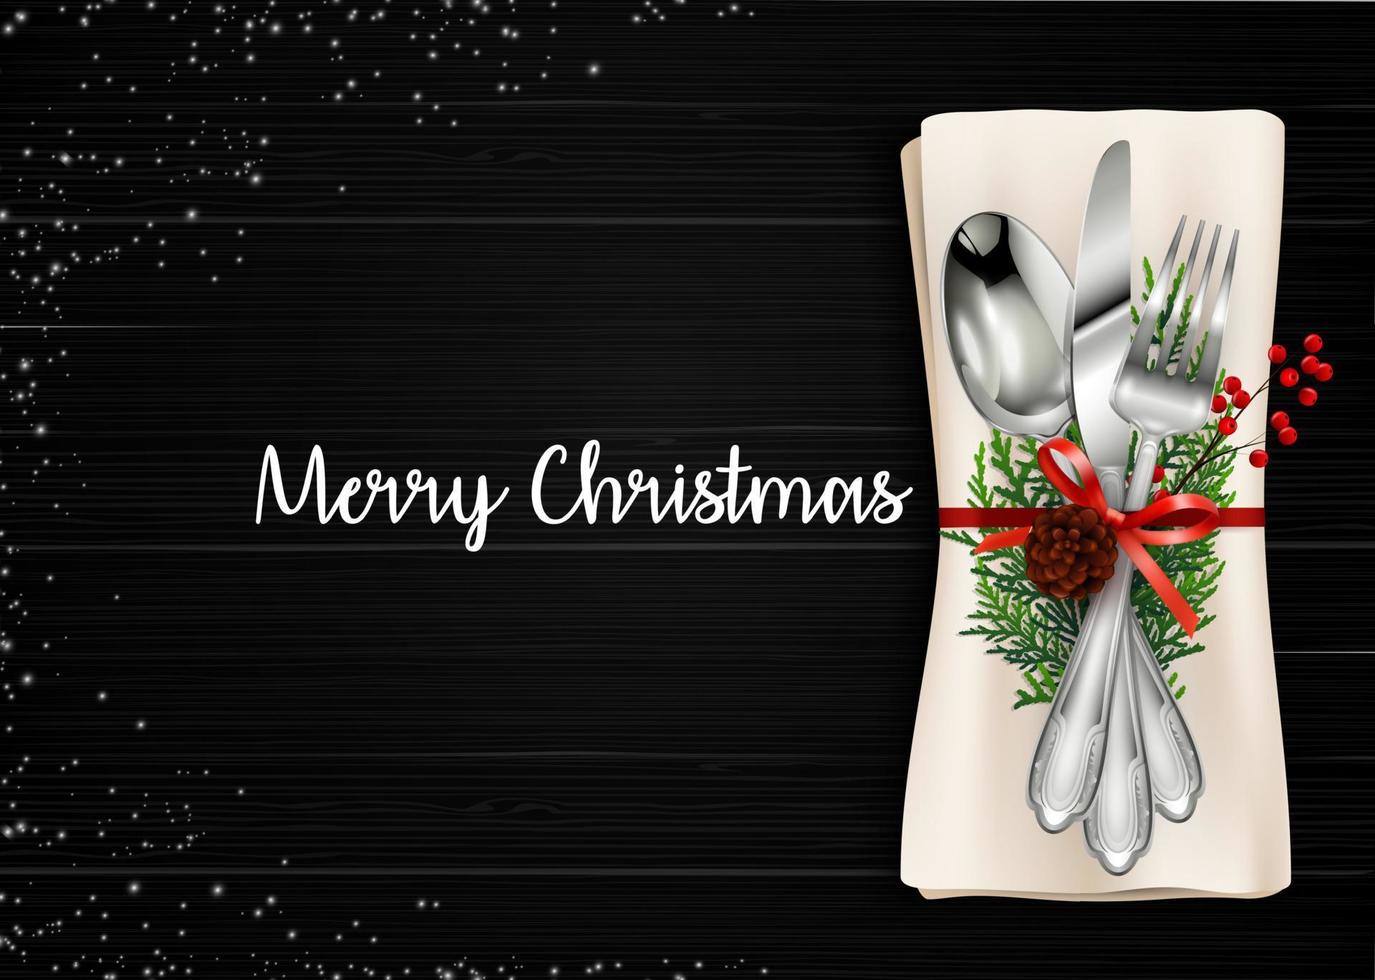 Vector illustration of Christmas meal table setting background